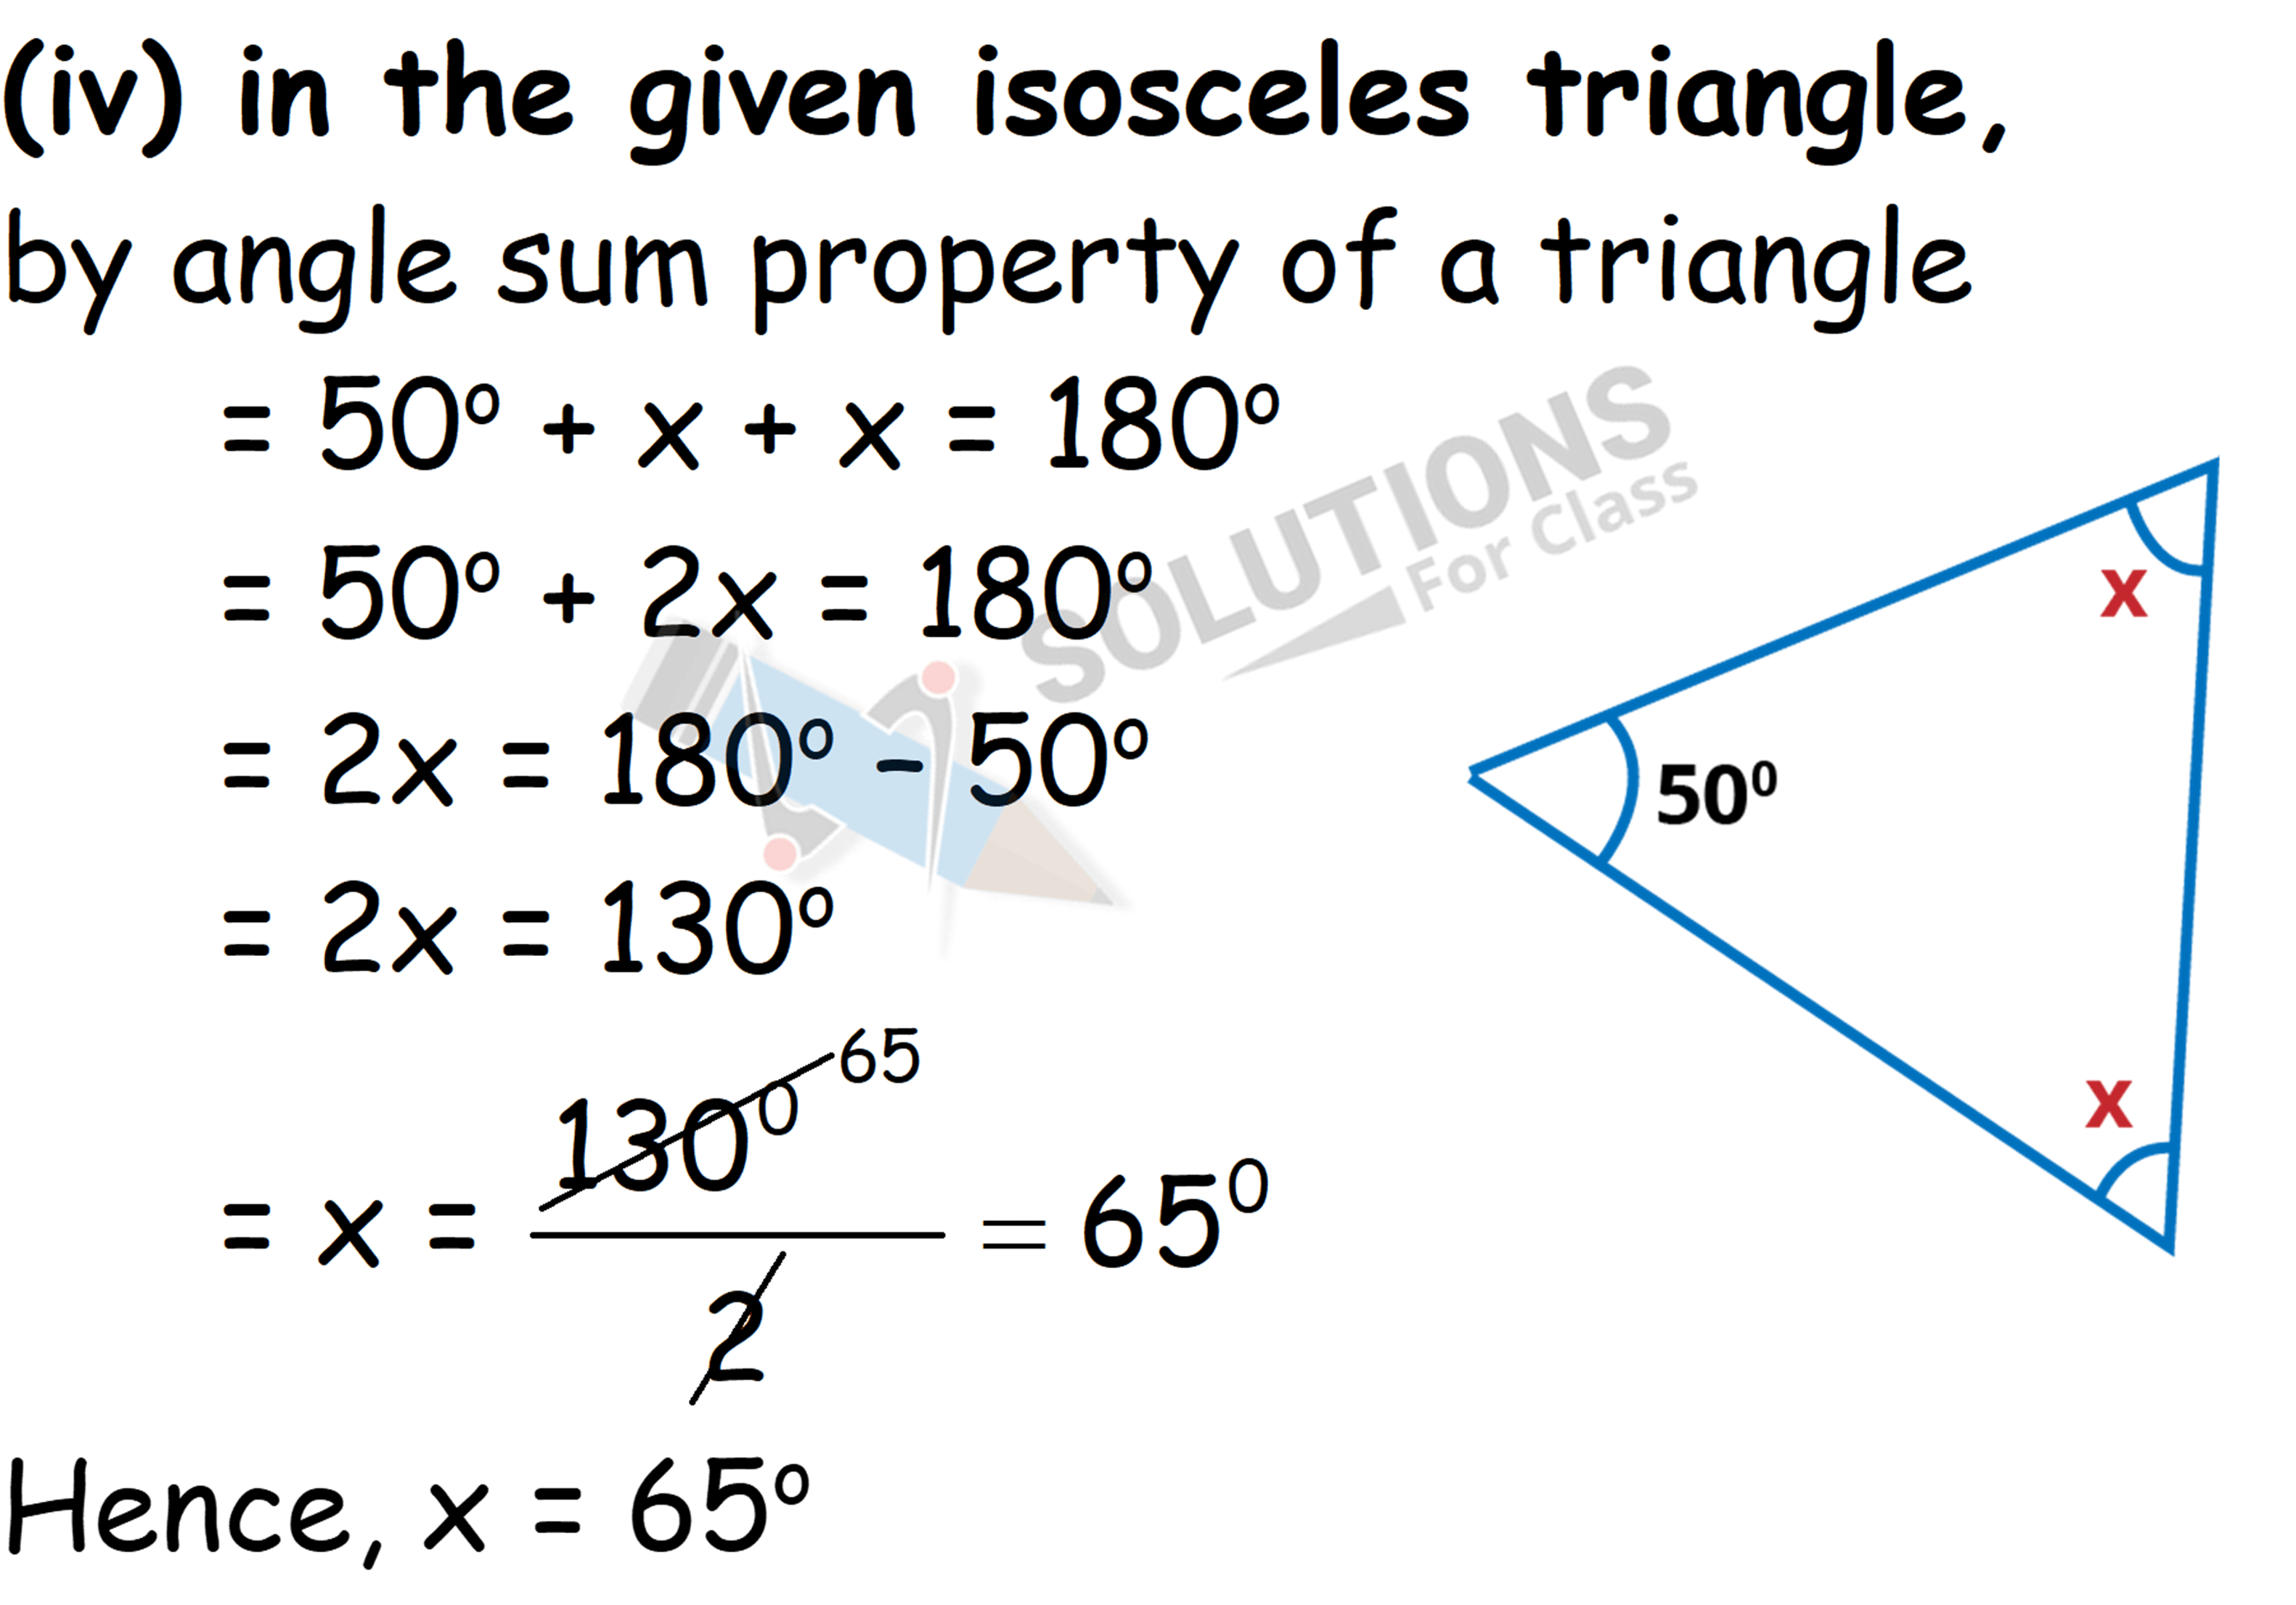 NCERT Solutions Class 7 Maths Chapter 6 The Triangle and its Properties Ex.6.3 Q.1 (iv)